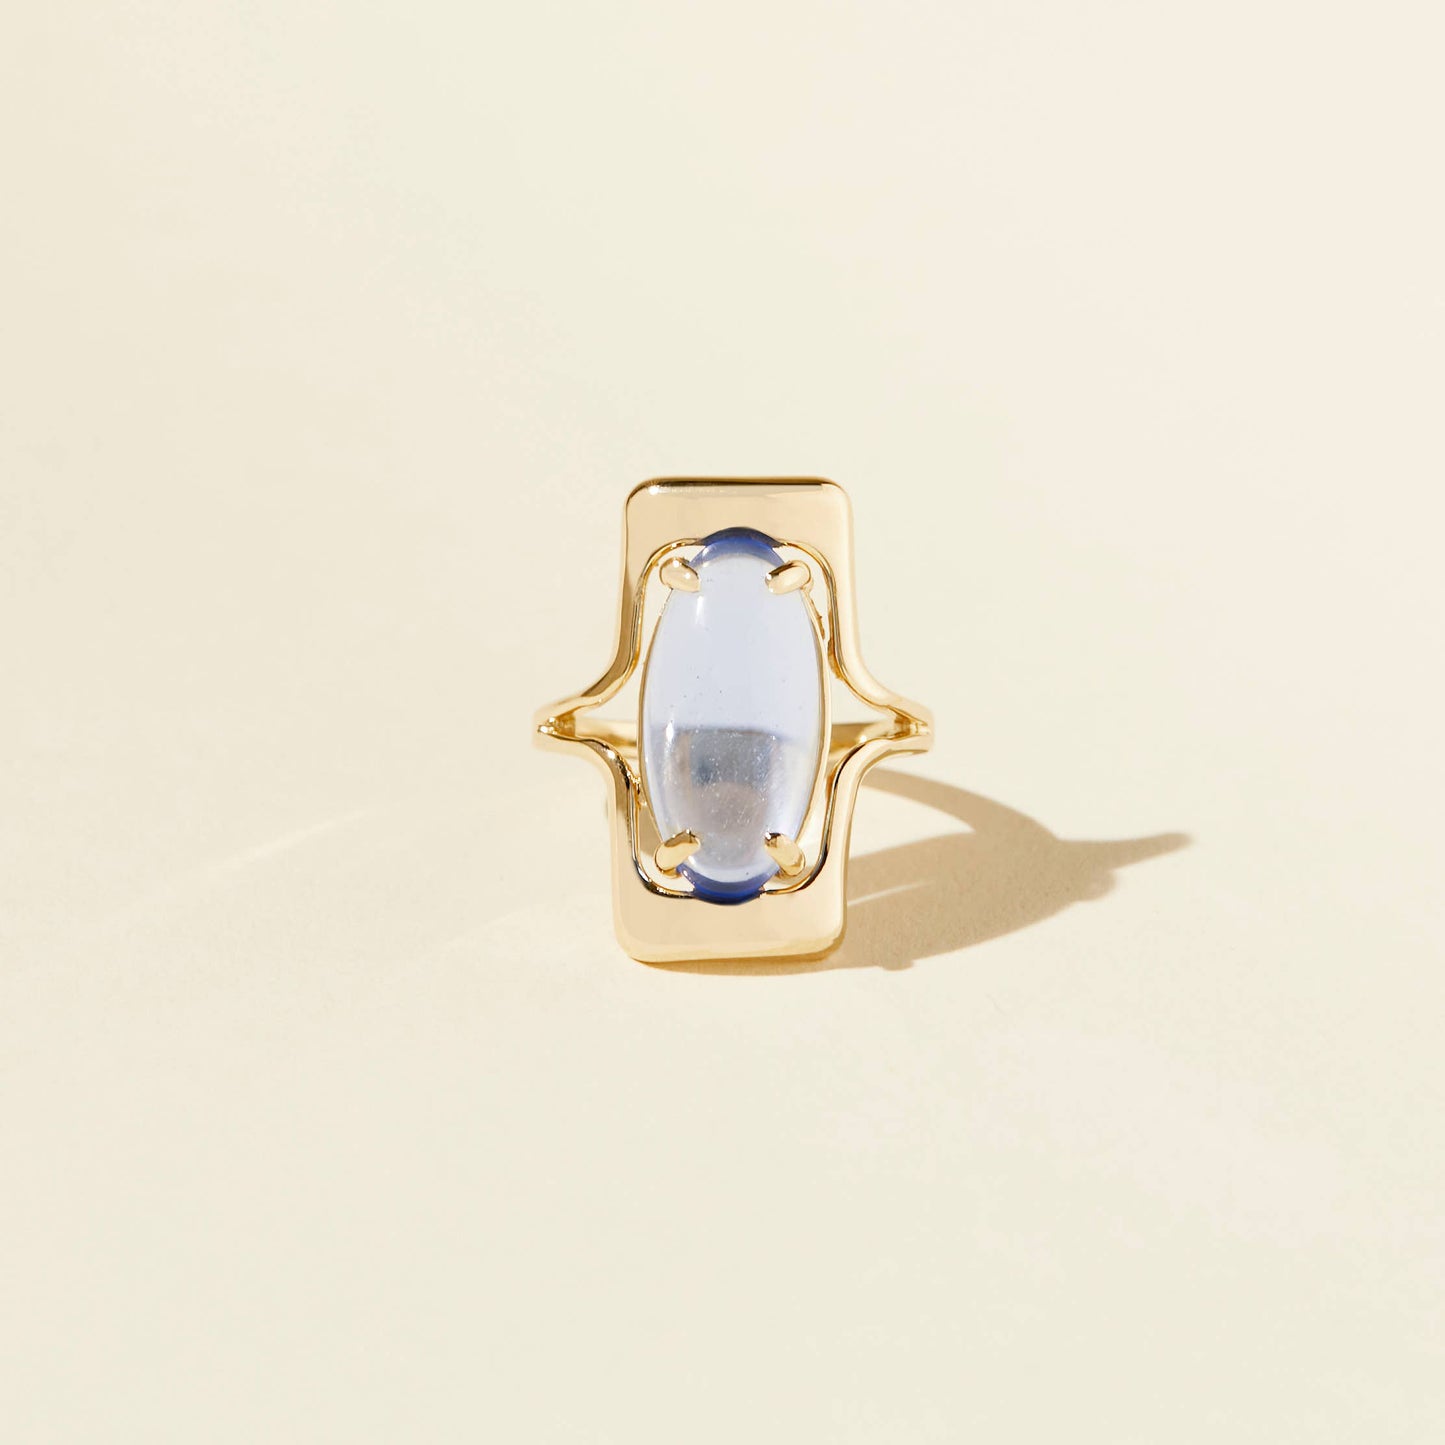 the blue walton ring with a large oval blue glass cabochon and curved gold accents on a beige background